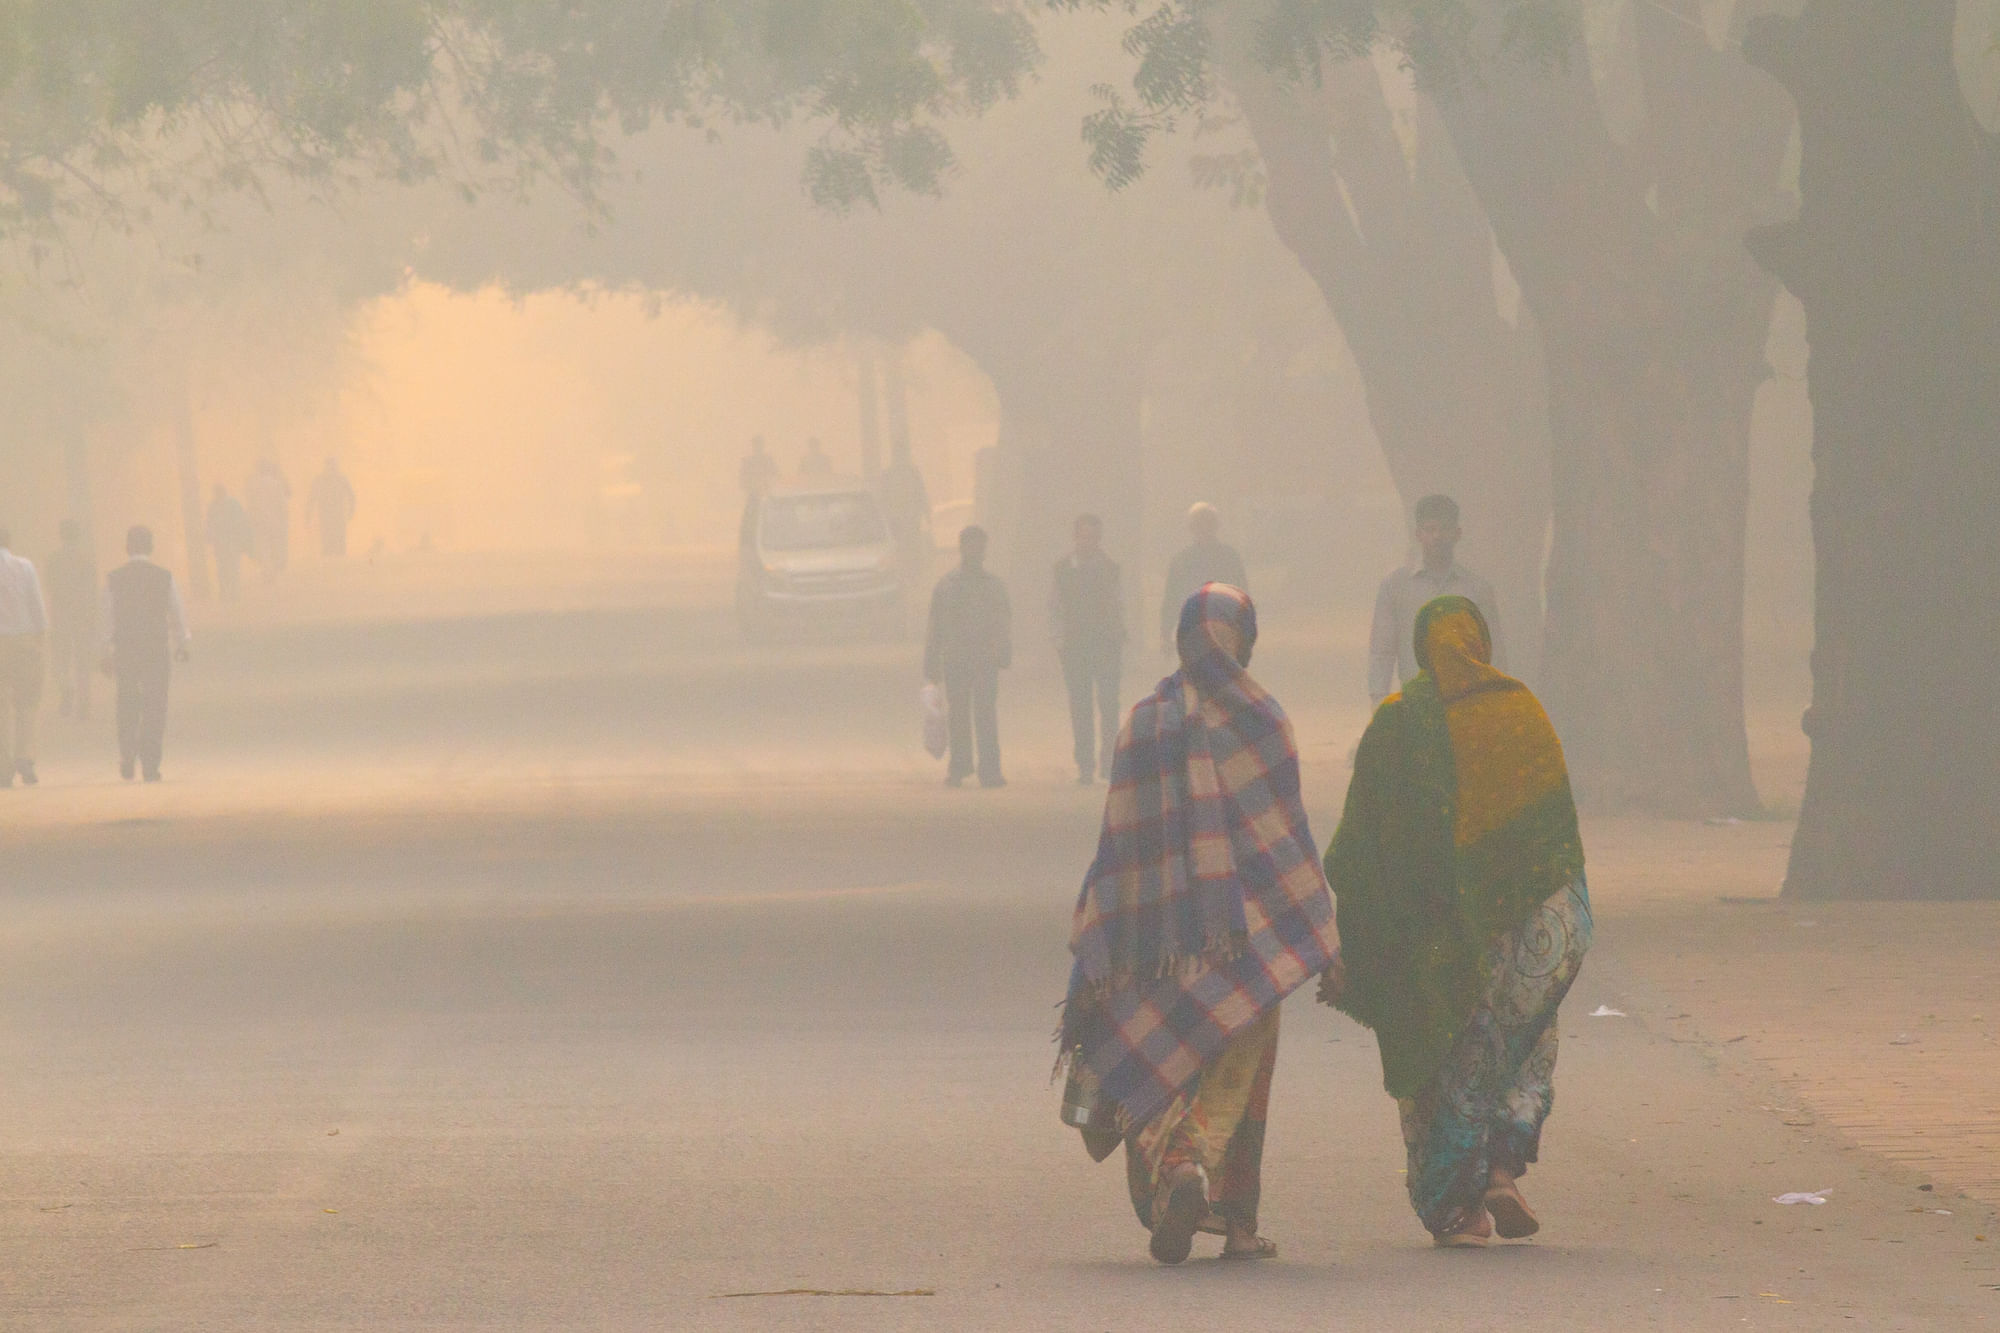 India has 10 of the world’s 15 most polluted cities, according to the World Health Organization.